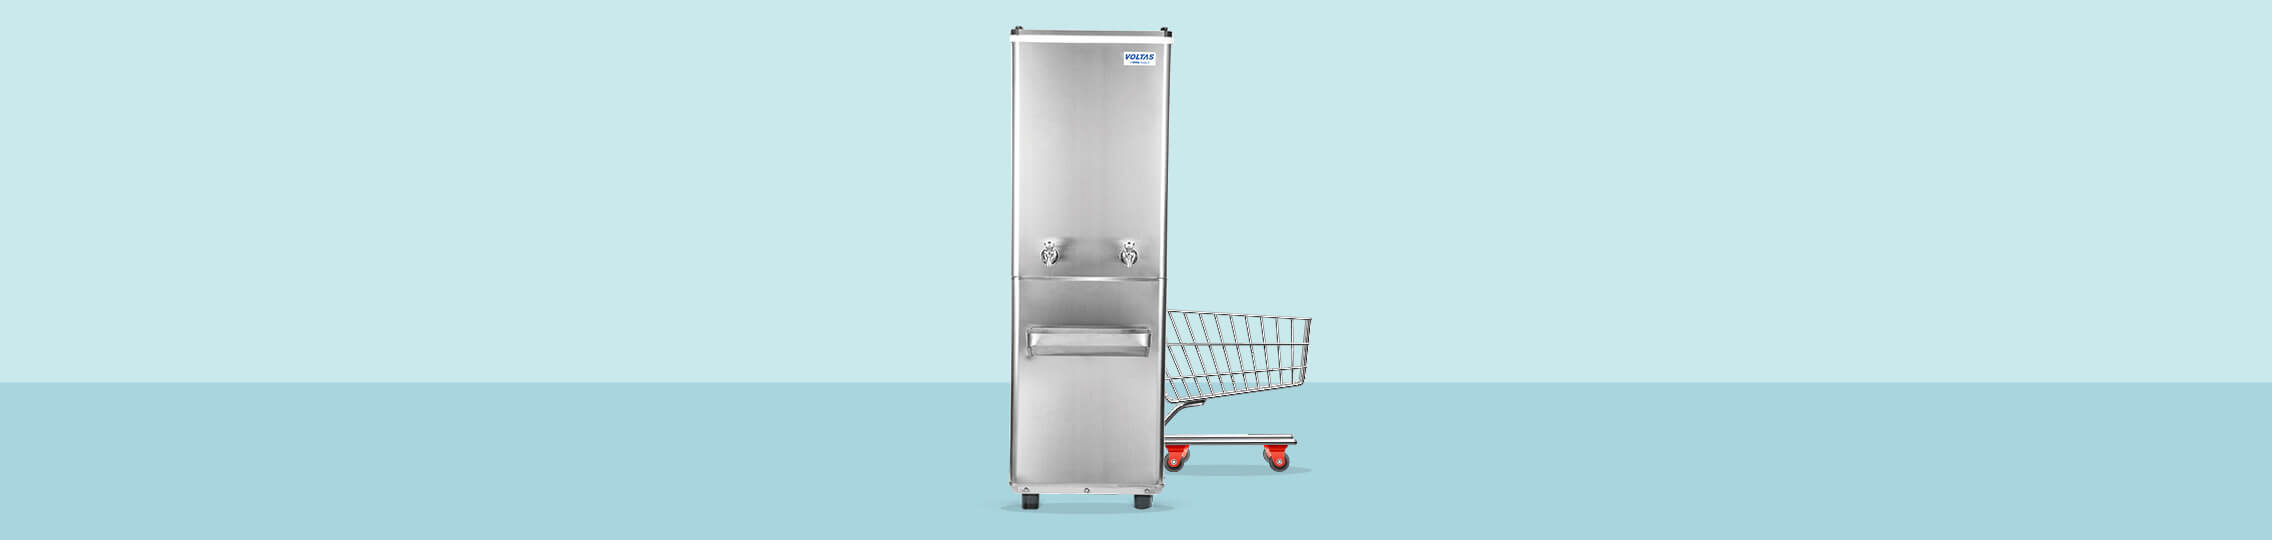 Four Factors to Consider While Purchasing a Water Cooler in India